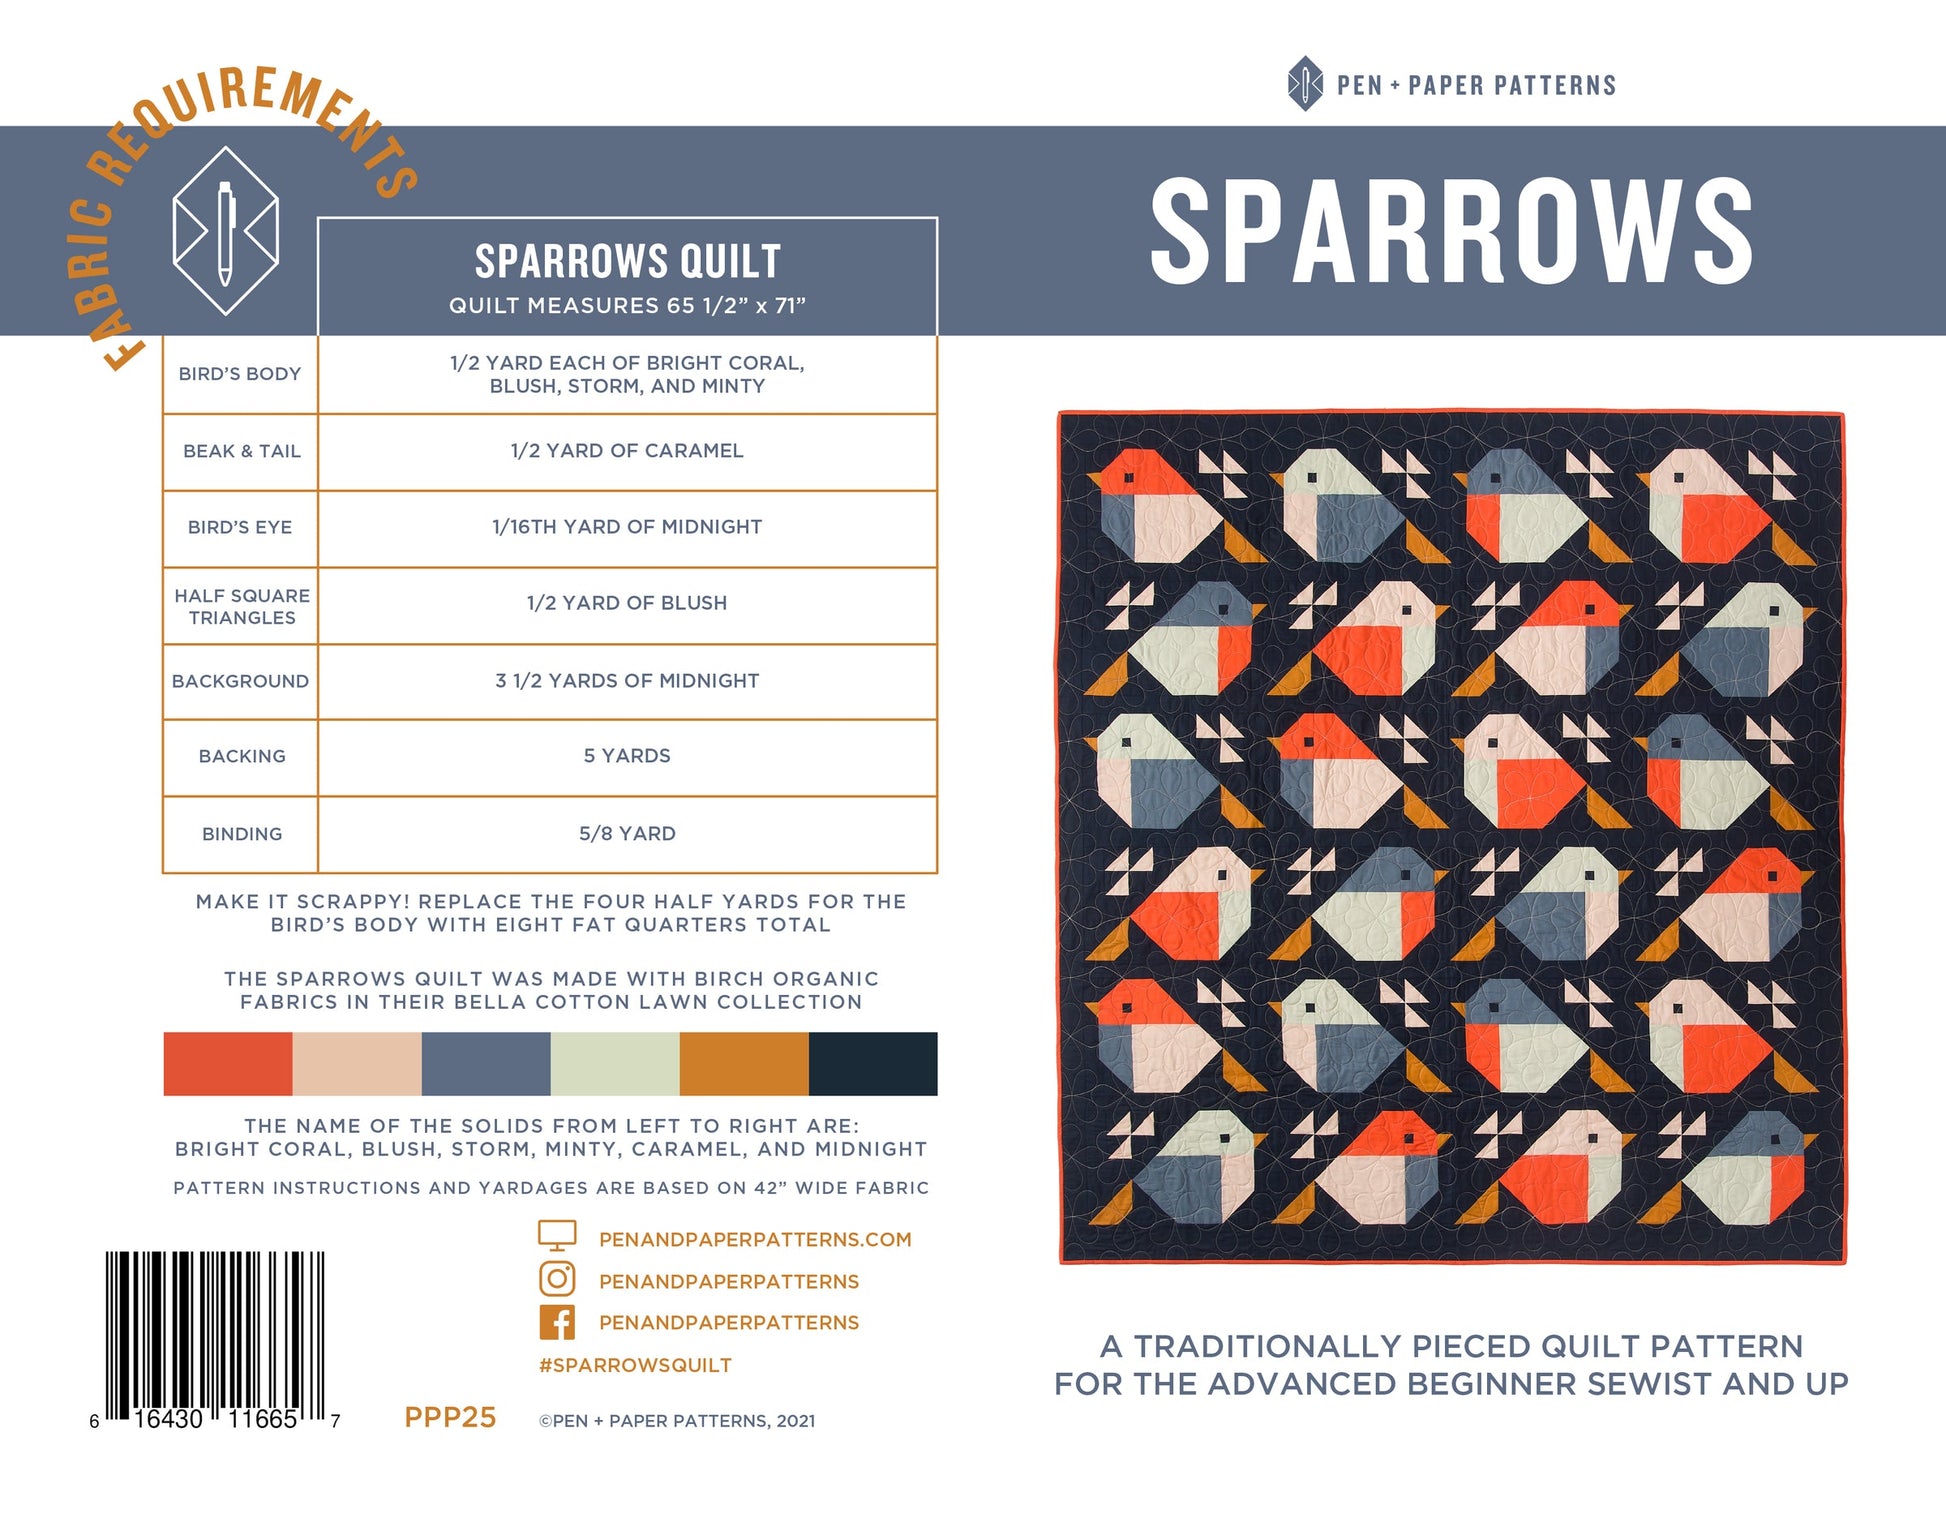 Other Sparrows Quilt Pattern by Pen + Paper Patterns - Printed Booklet